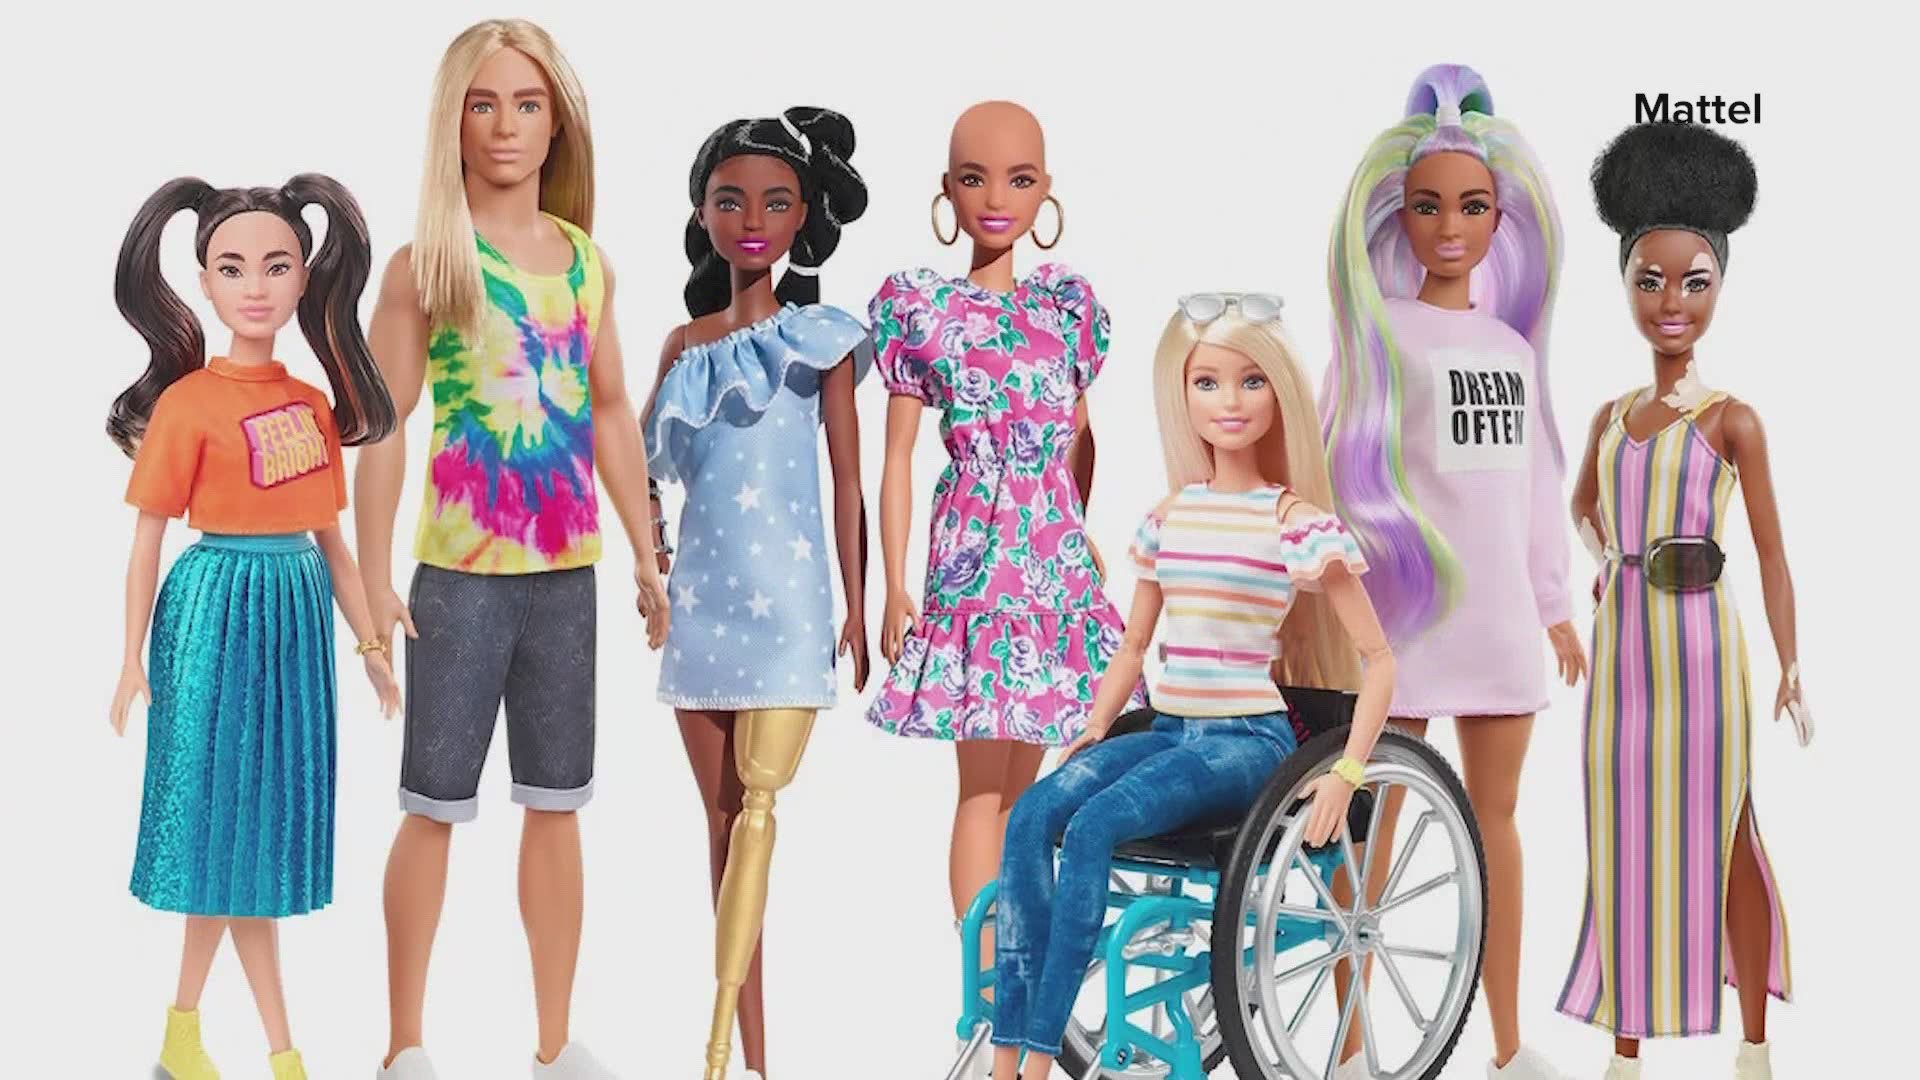 Mattel vows to support diversity, inclusion, and tough conversations about race.